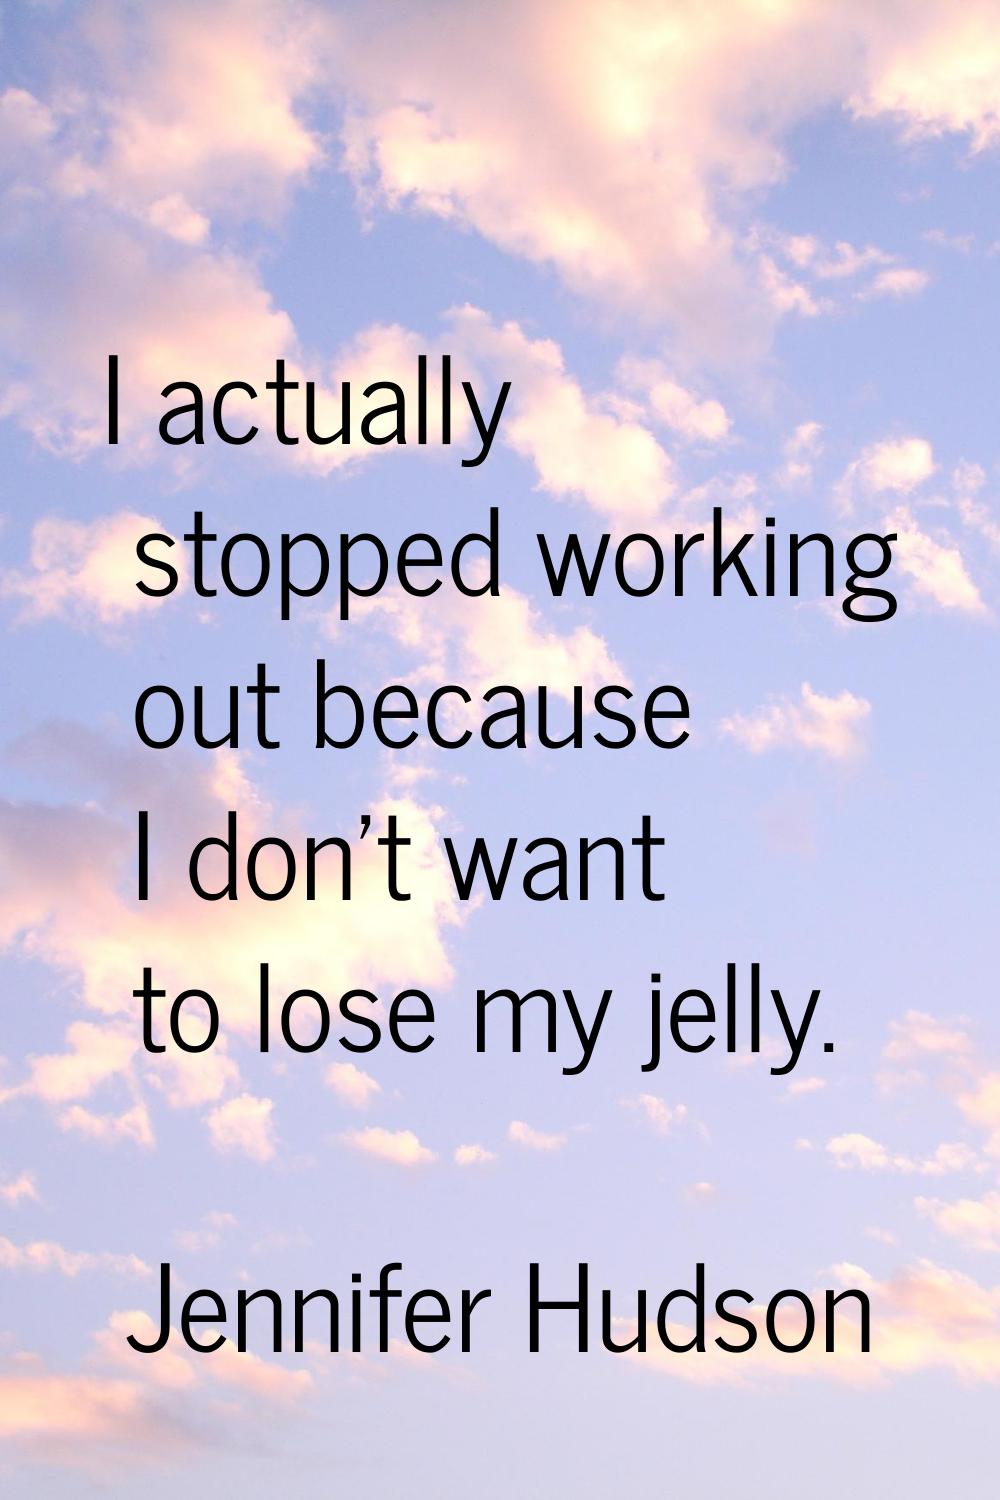 I actually stopped working out because I don't want to lose my jelly.